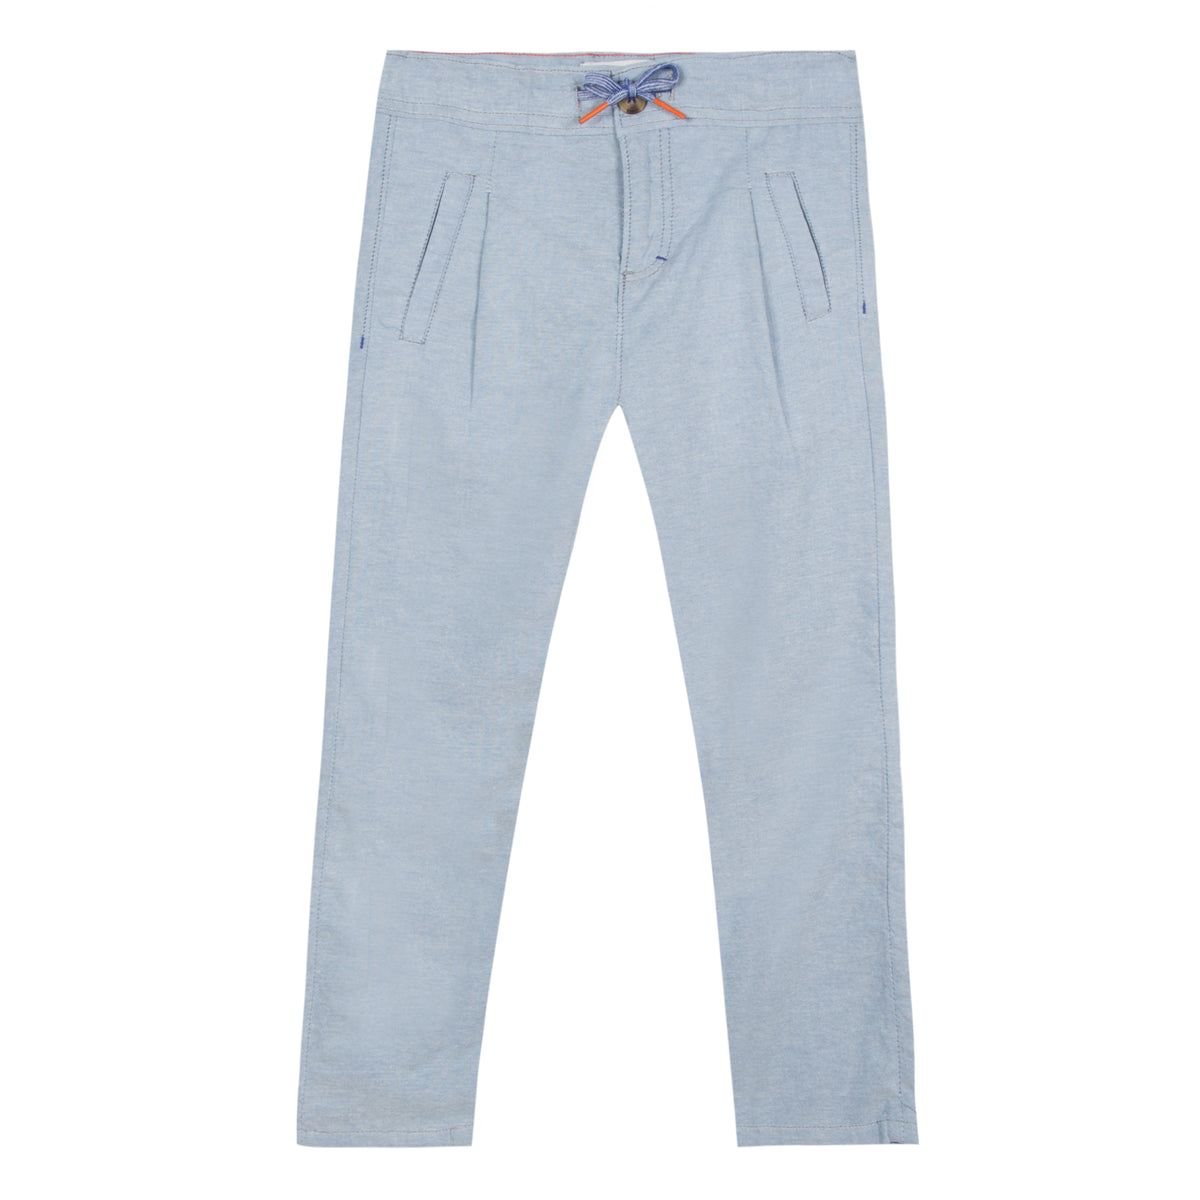 blue chambray pants have a graphic drawstring with orange ends. Fluid and light, silhouette is trimmed with two welt pockets at the front and back. Deigned by Jean Bourget.